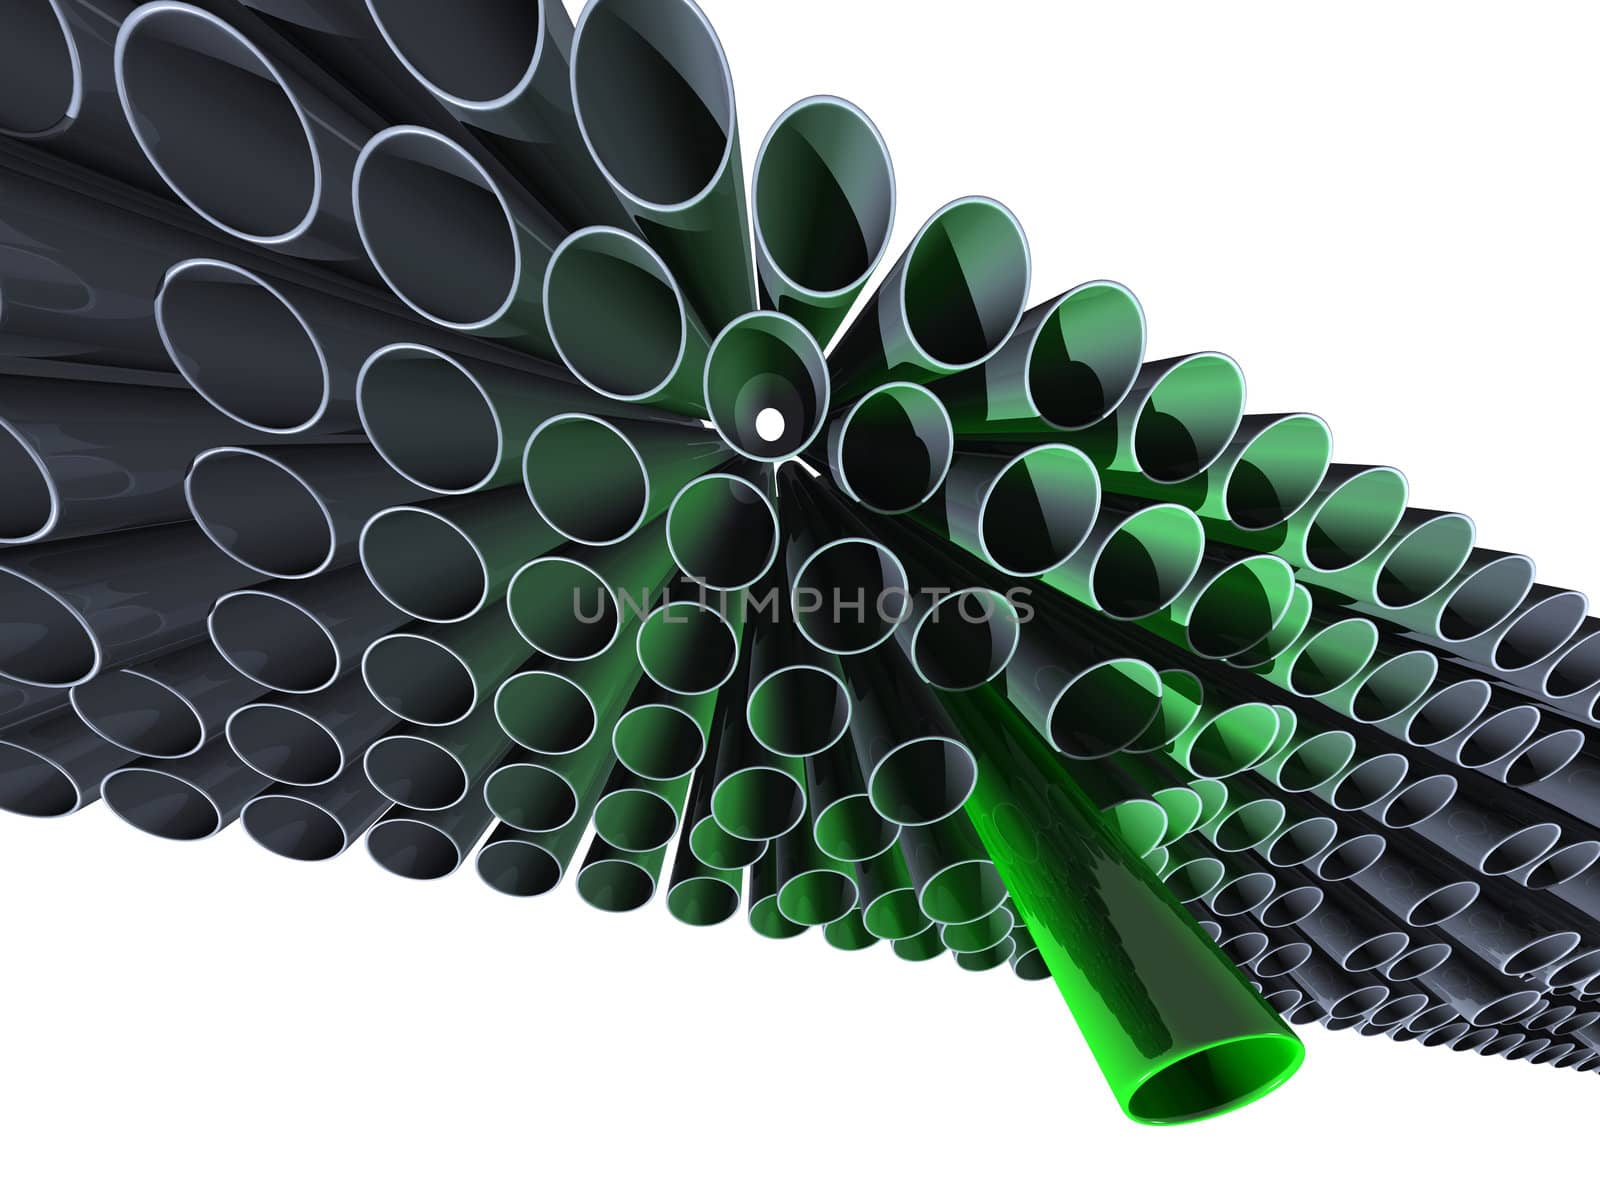 Lot of grey pipes with one high green on a white background